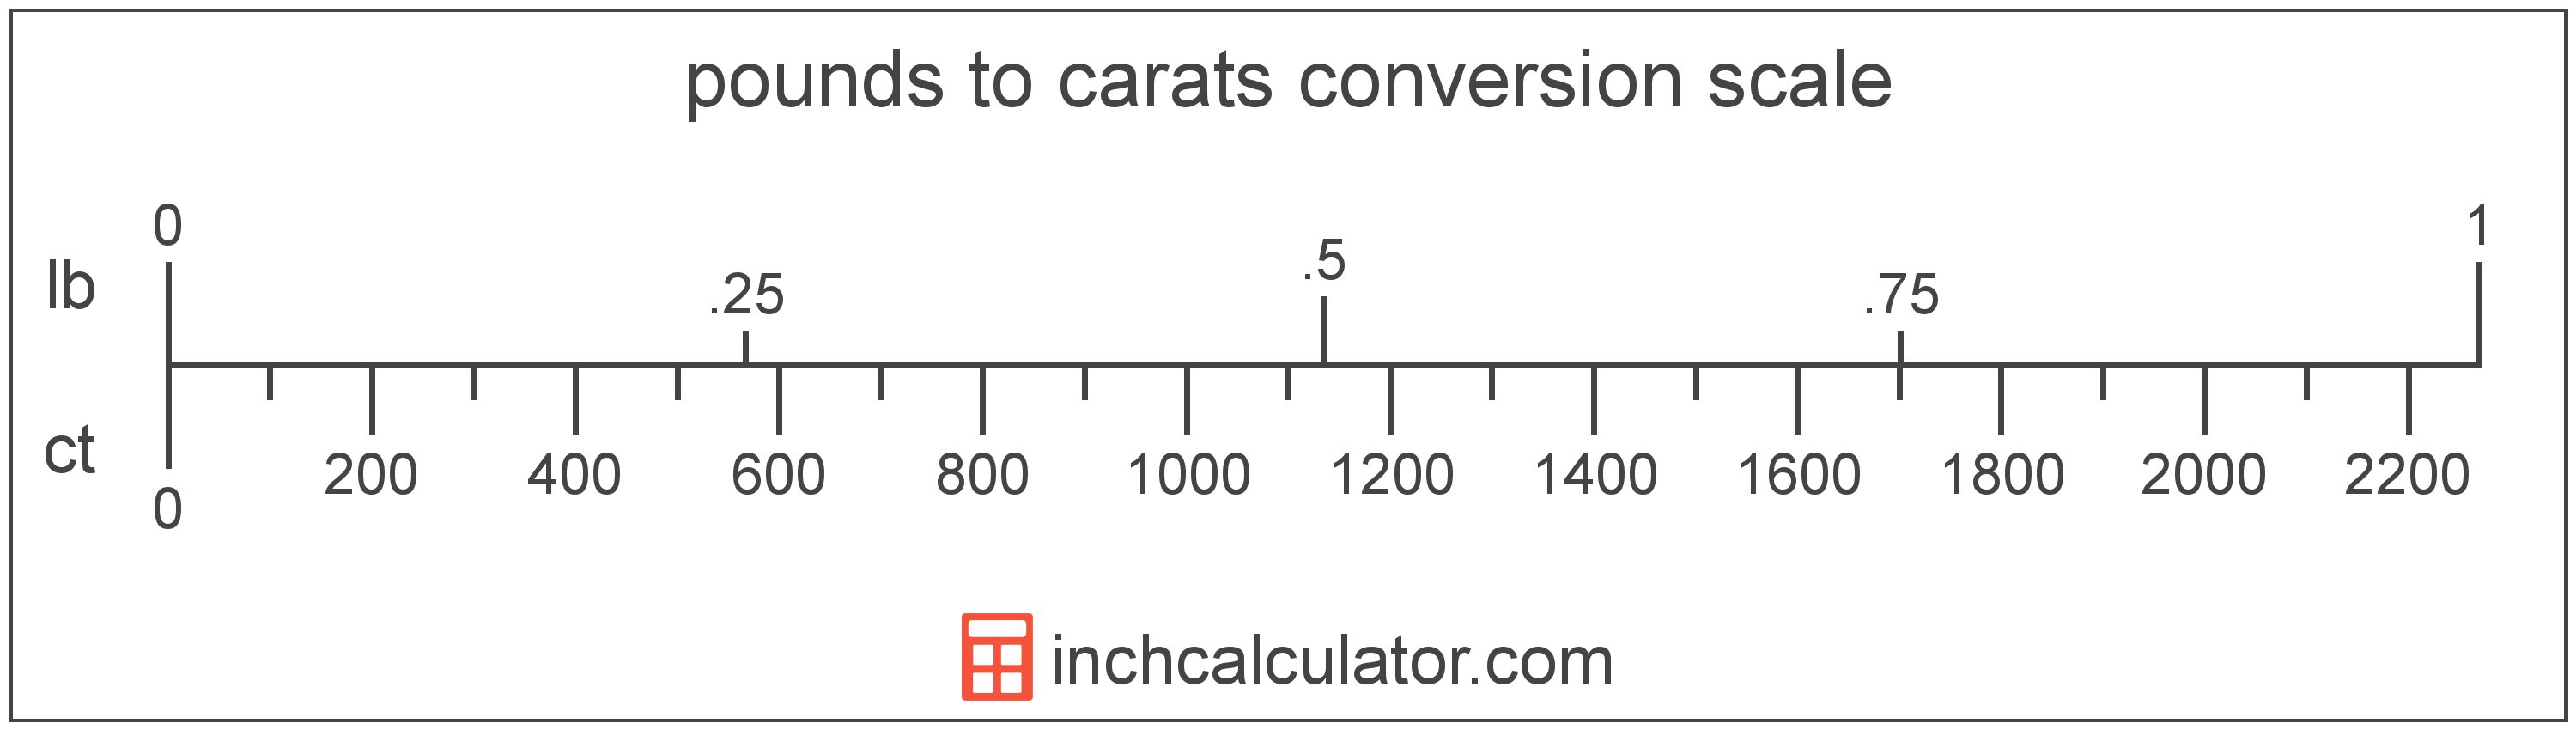 conversion scale showing pounds and equivalent carats weight values